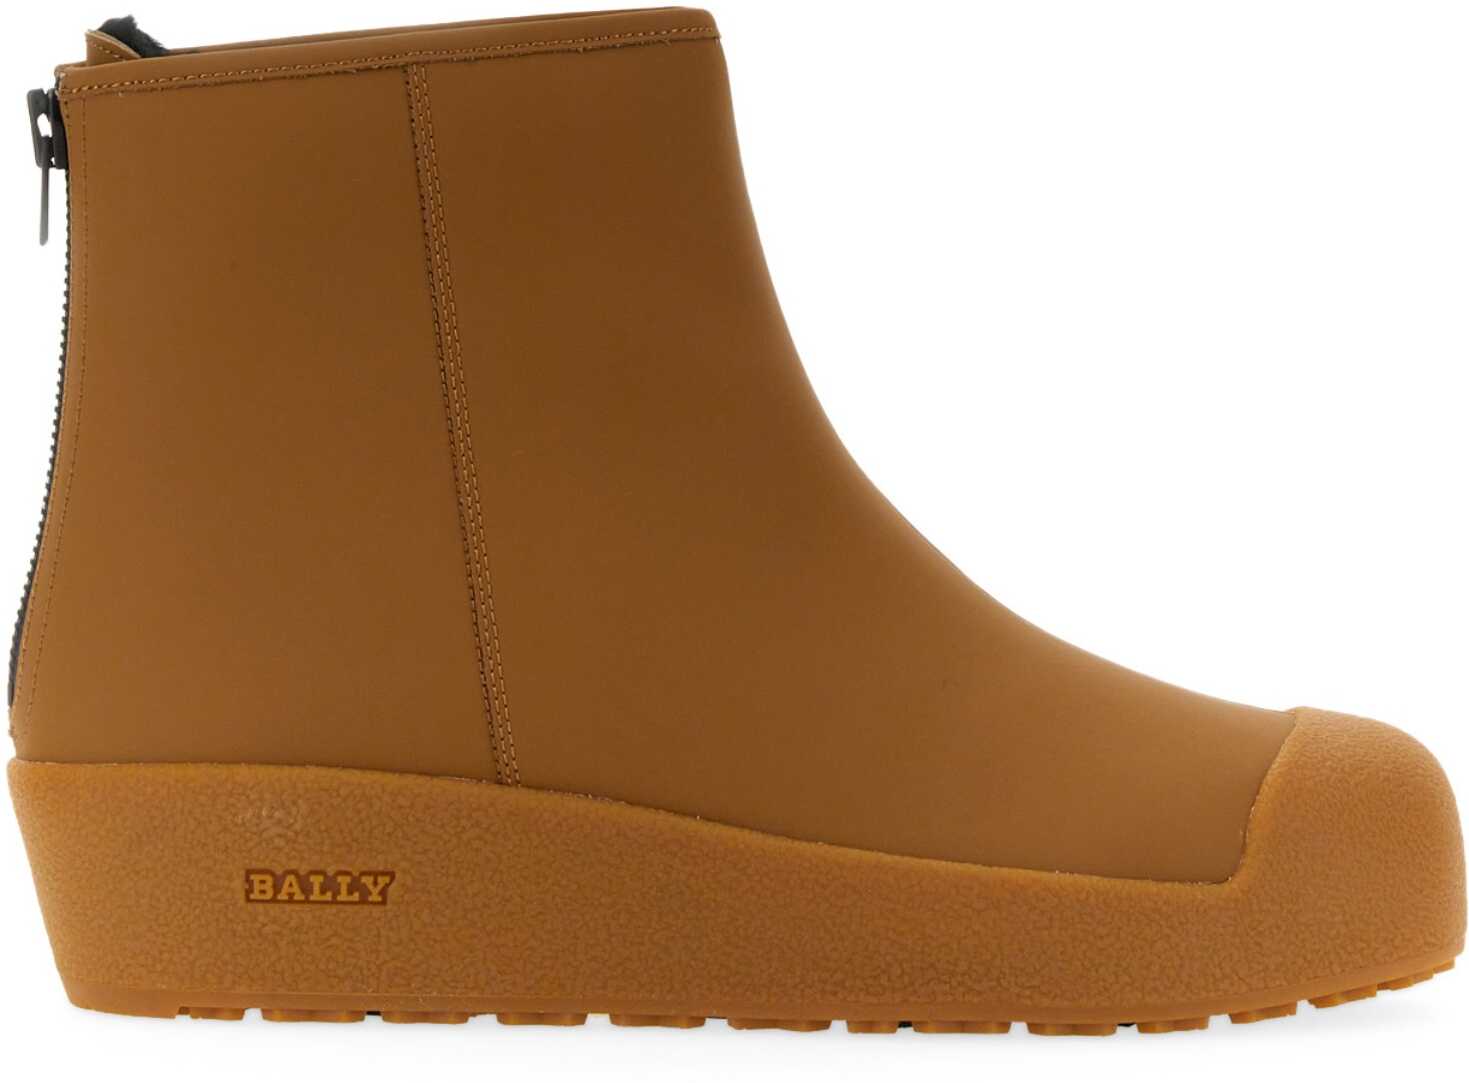 BALLY CURLING Curling Boot BROWN